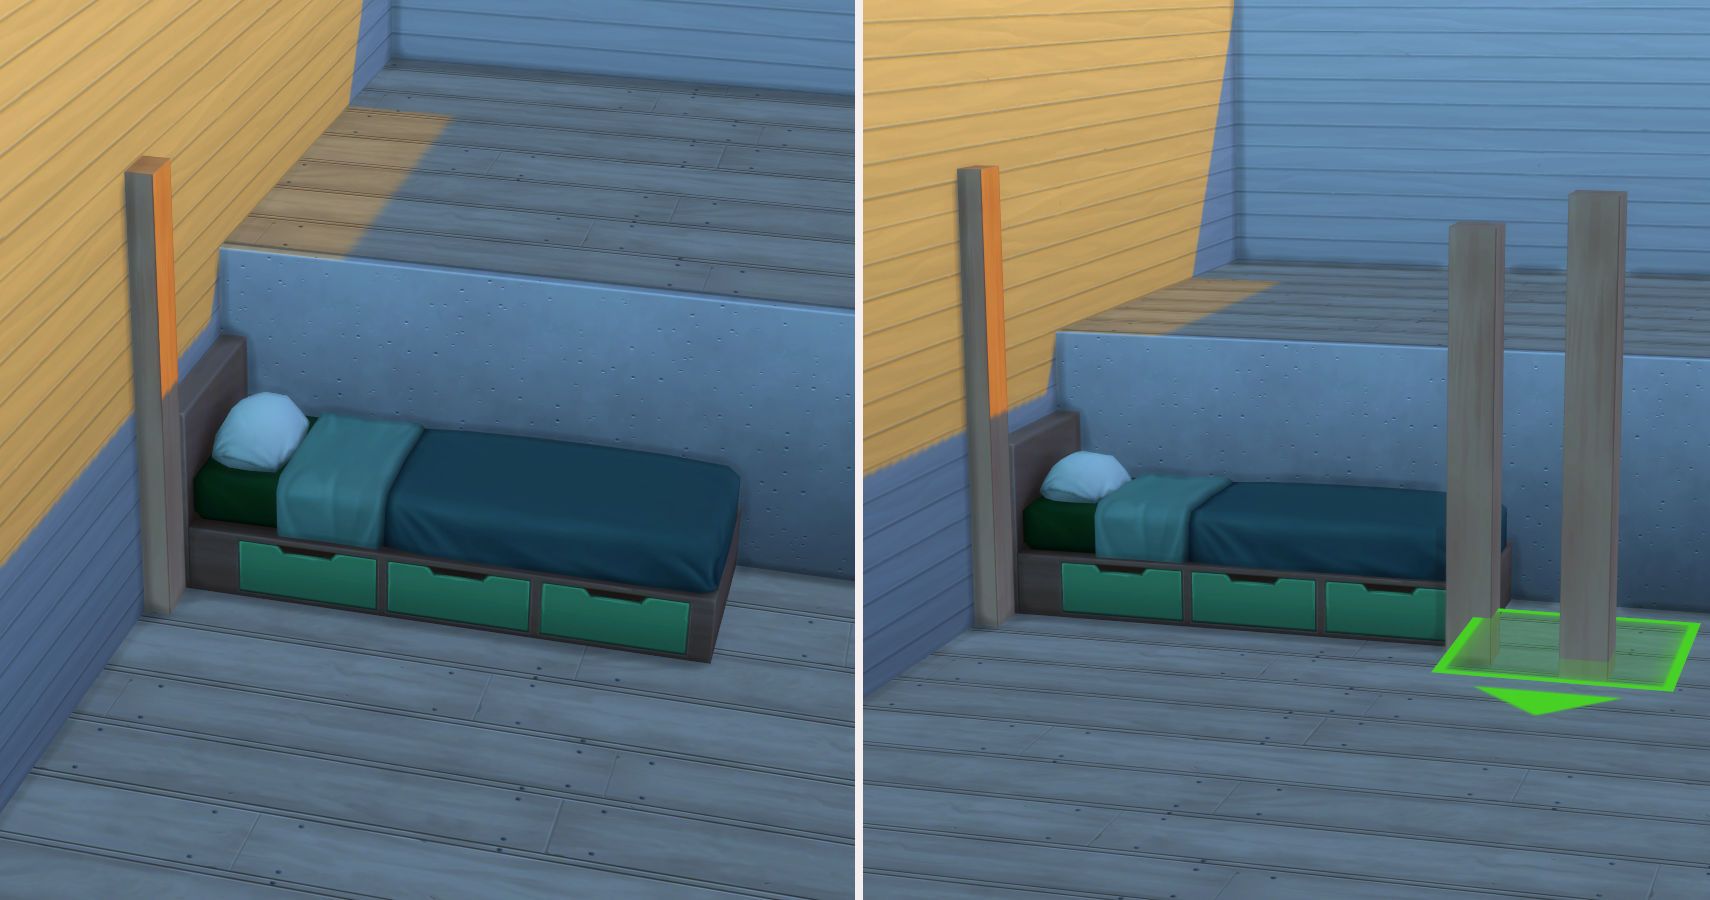 Split image. Left side the bed with one post. Right side the bed with the third post being placed.